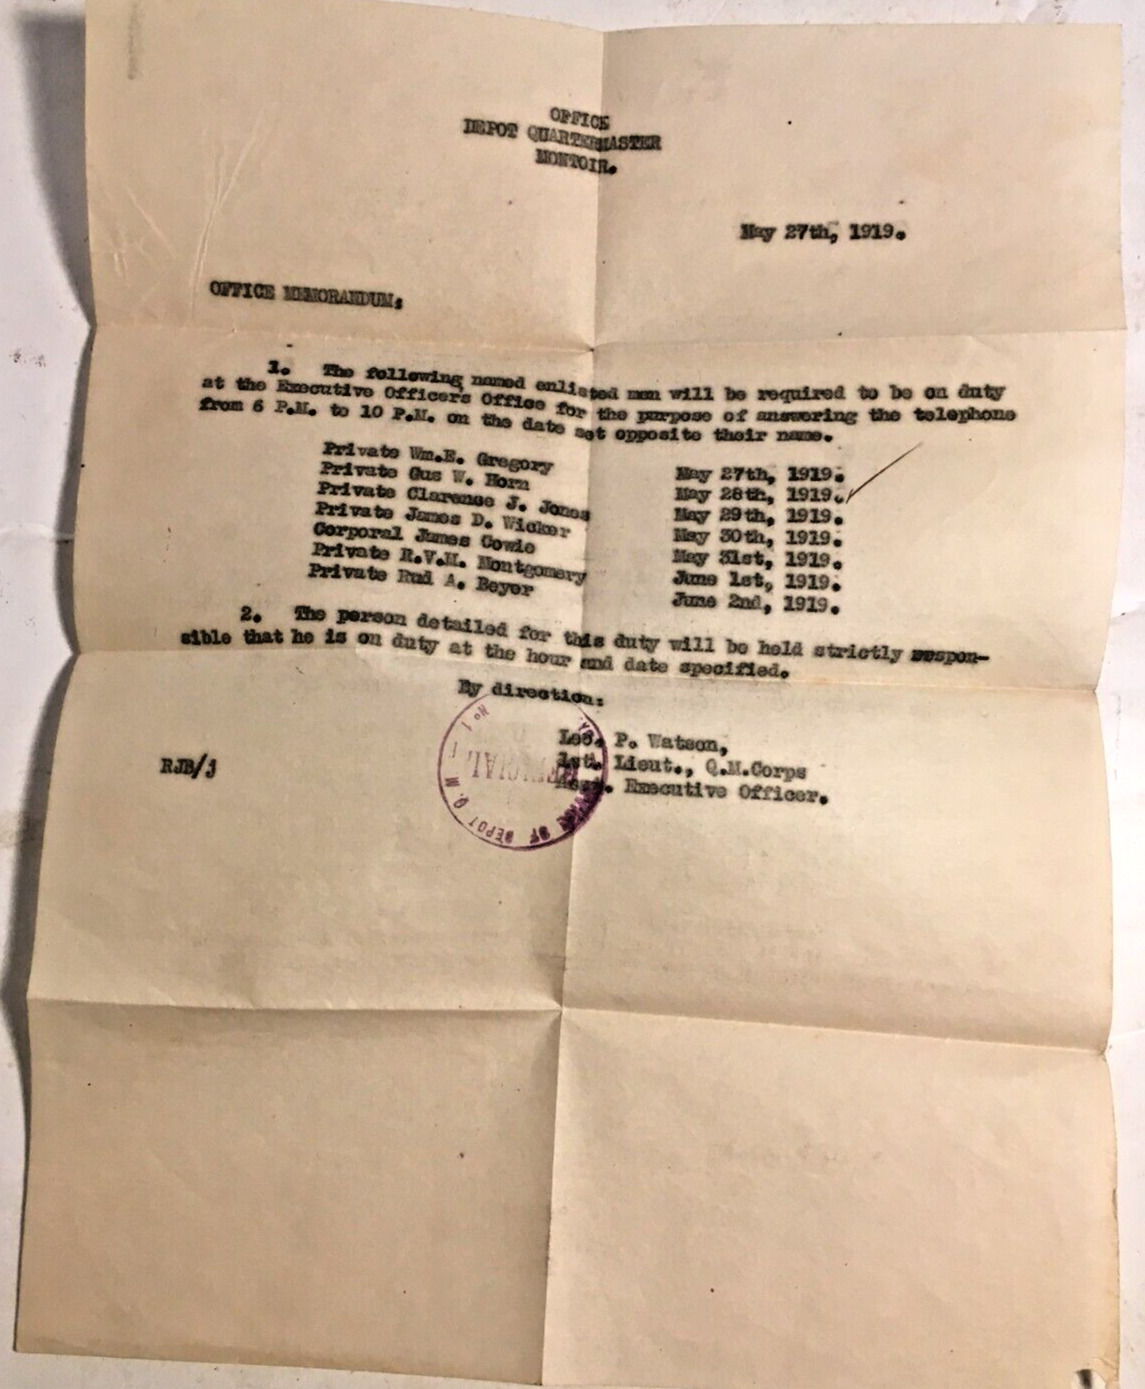 May 27th 1919 Duty Assignment Orders for Telephone Duty Pvt Gus Horn et al